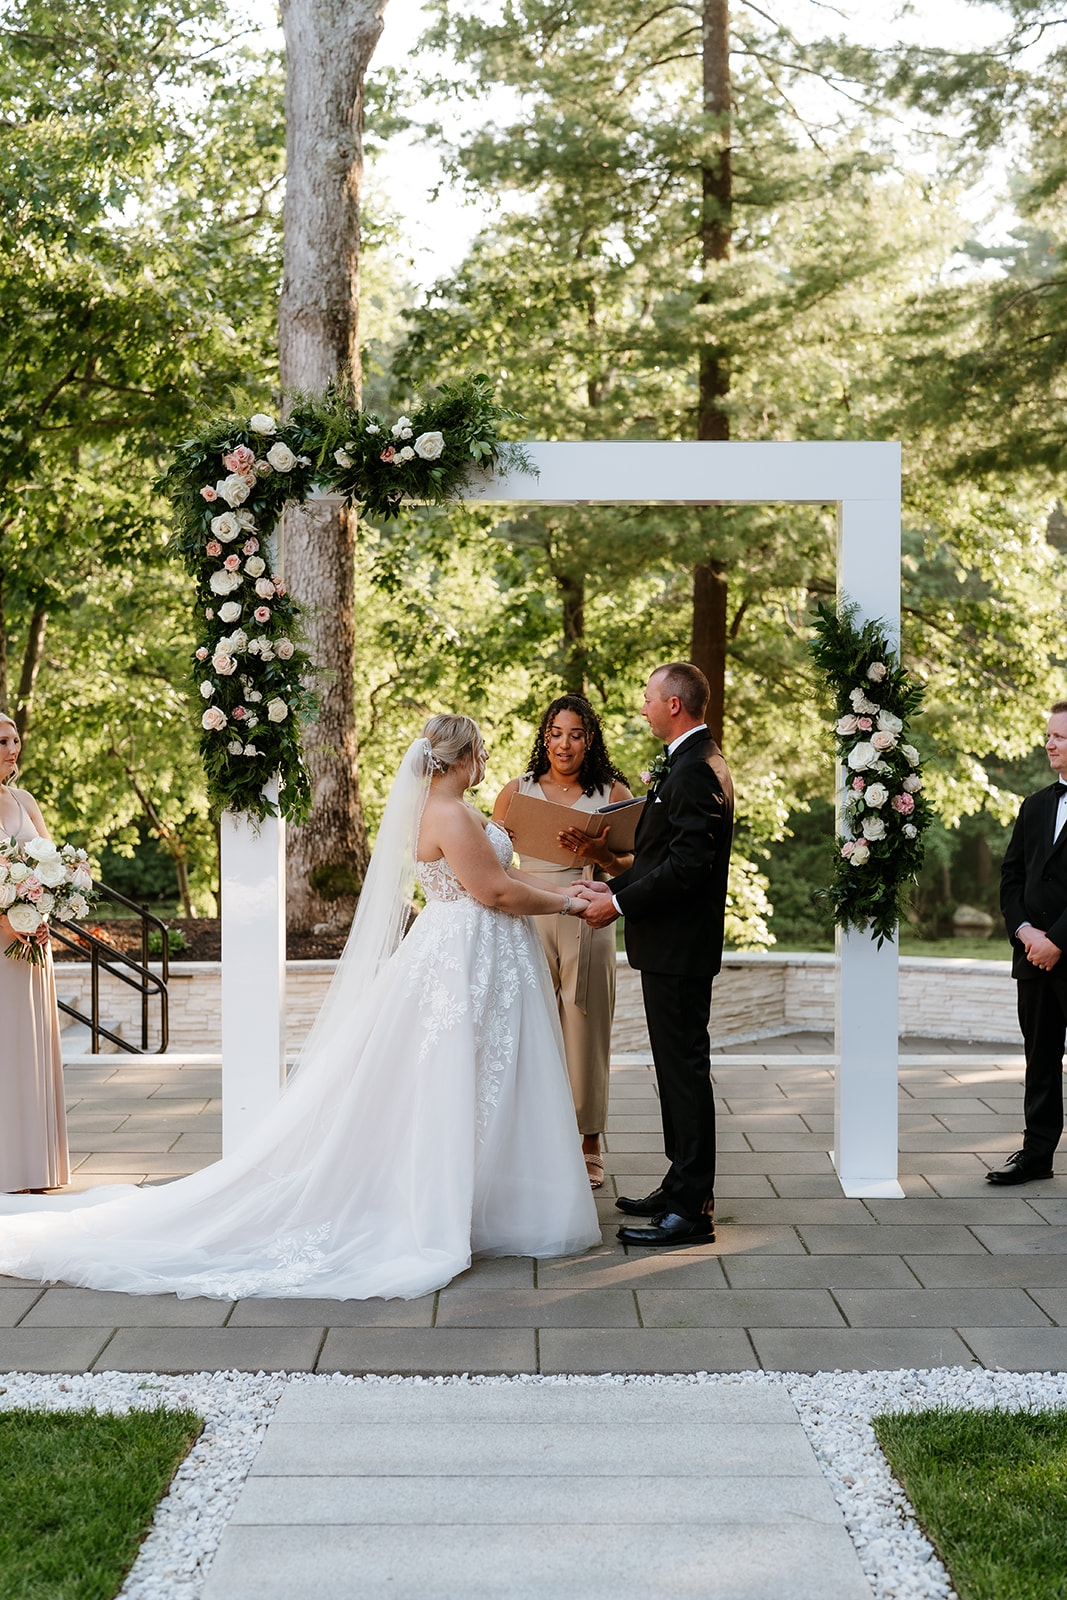 A bride and groom hold hands at an outdoor wedding ceremony while surrounded by their bridal party at Lakeview Pavilion.